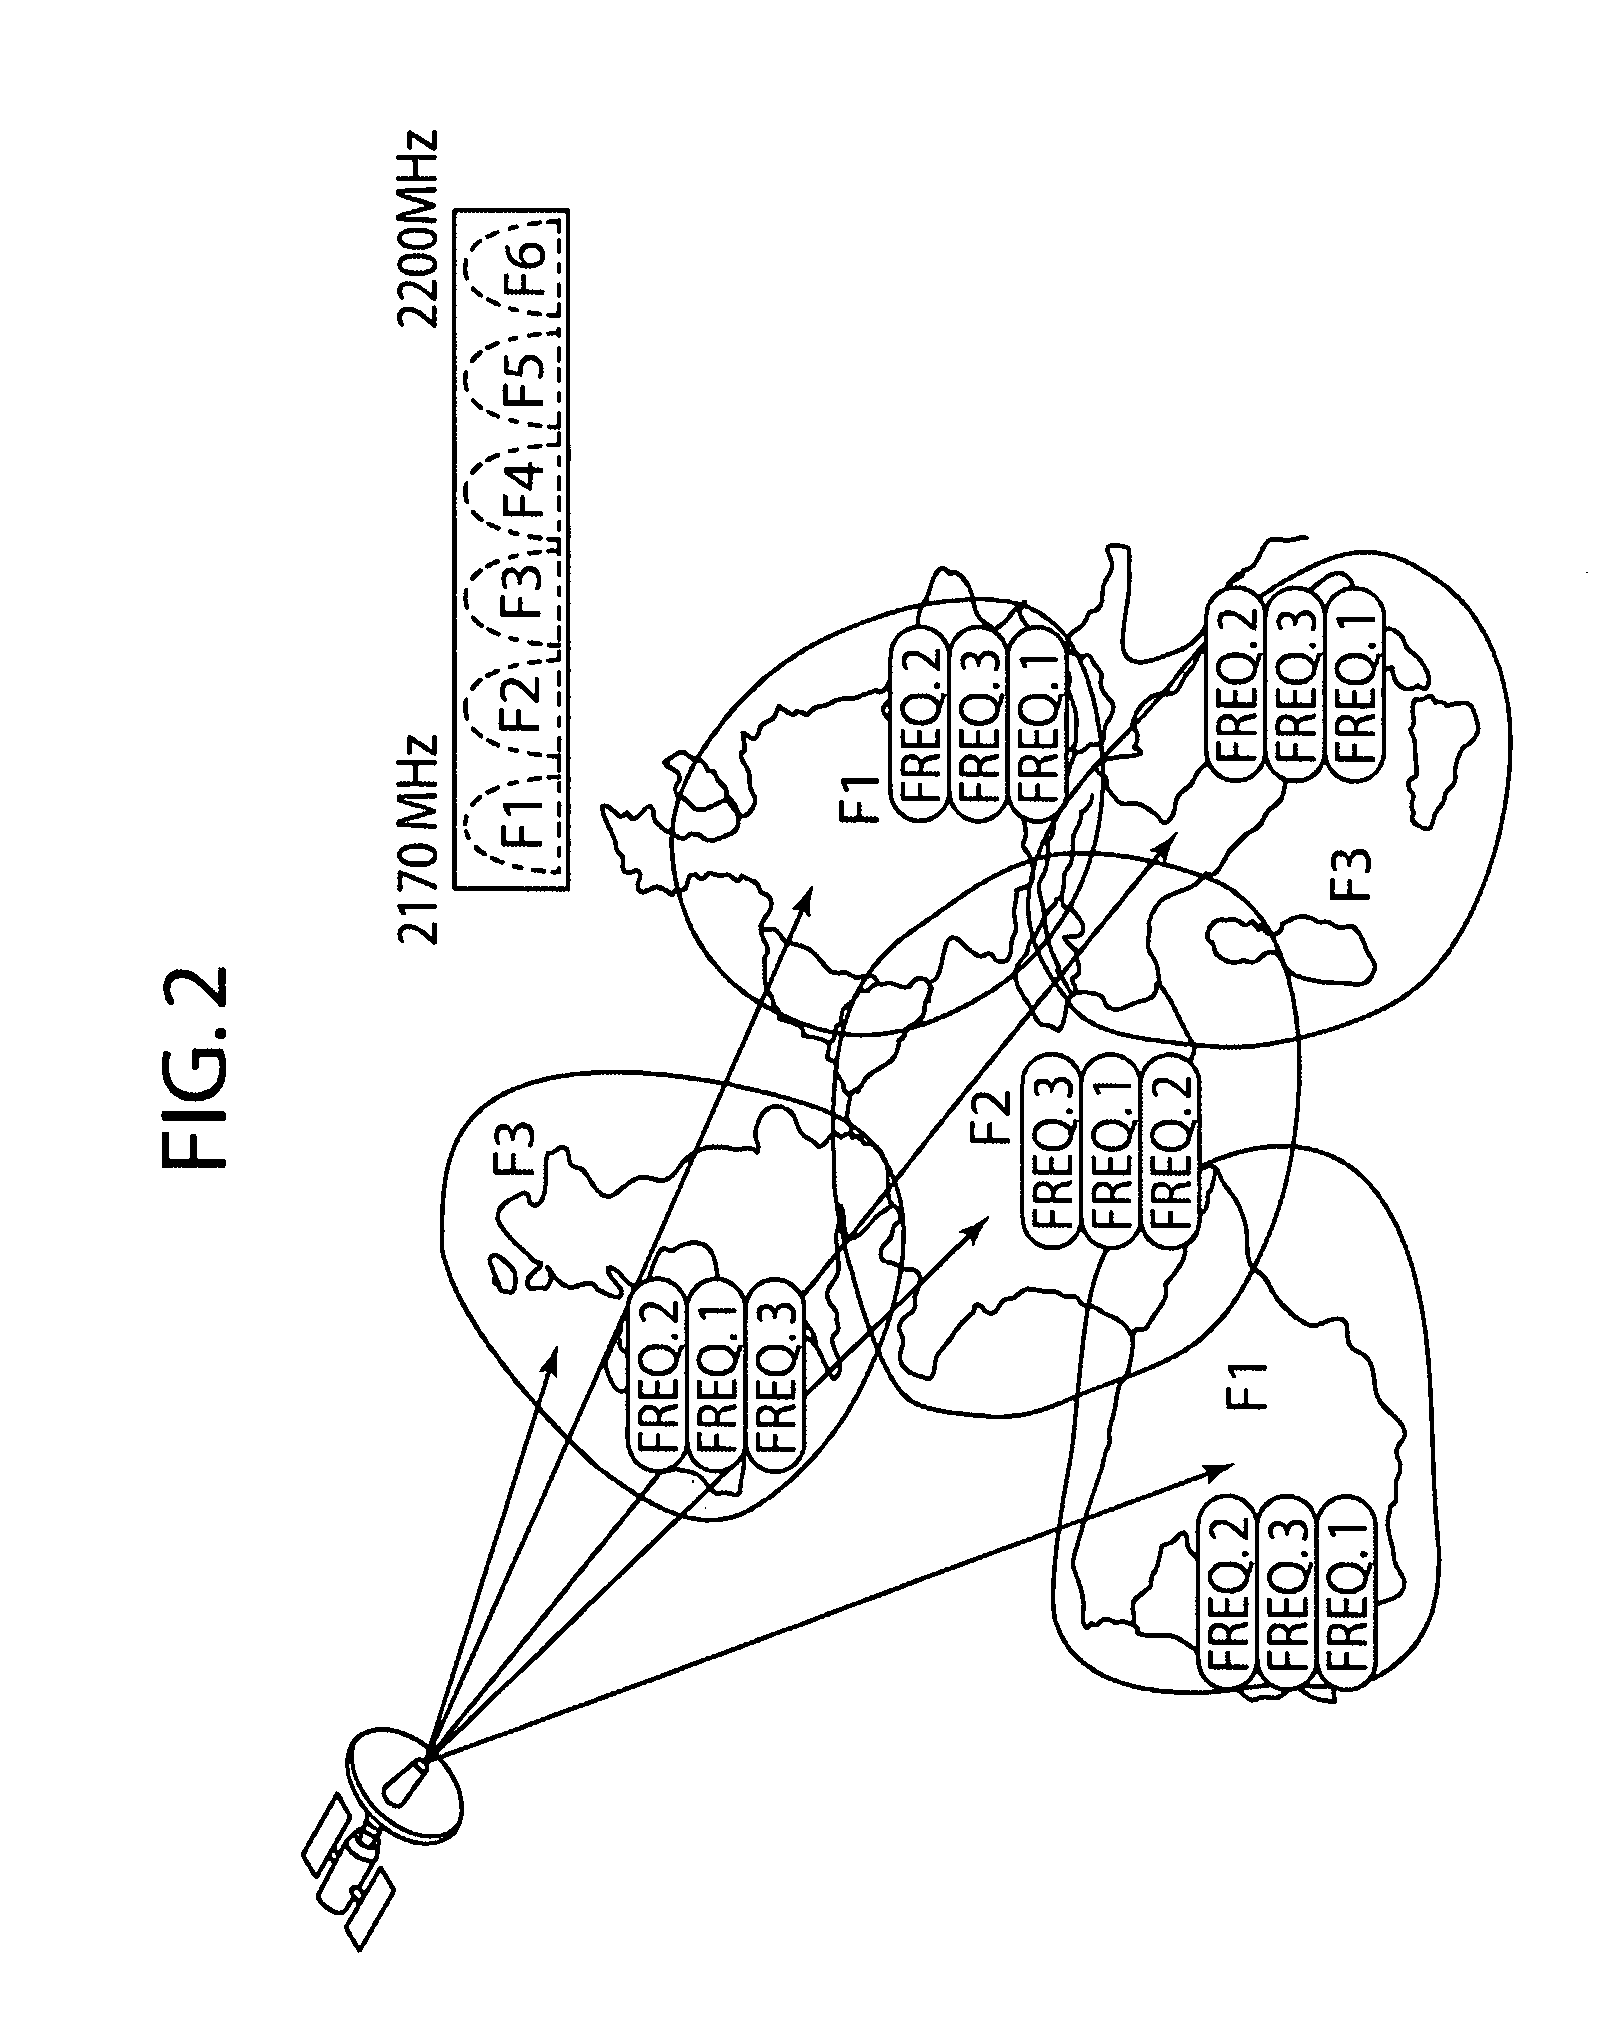 Communication system and method of receiving high priority signals and low priority signals